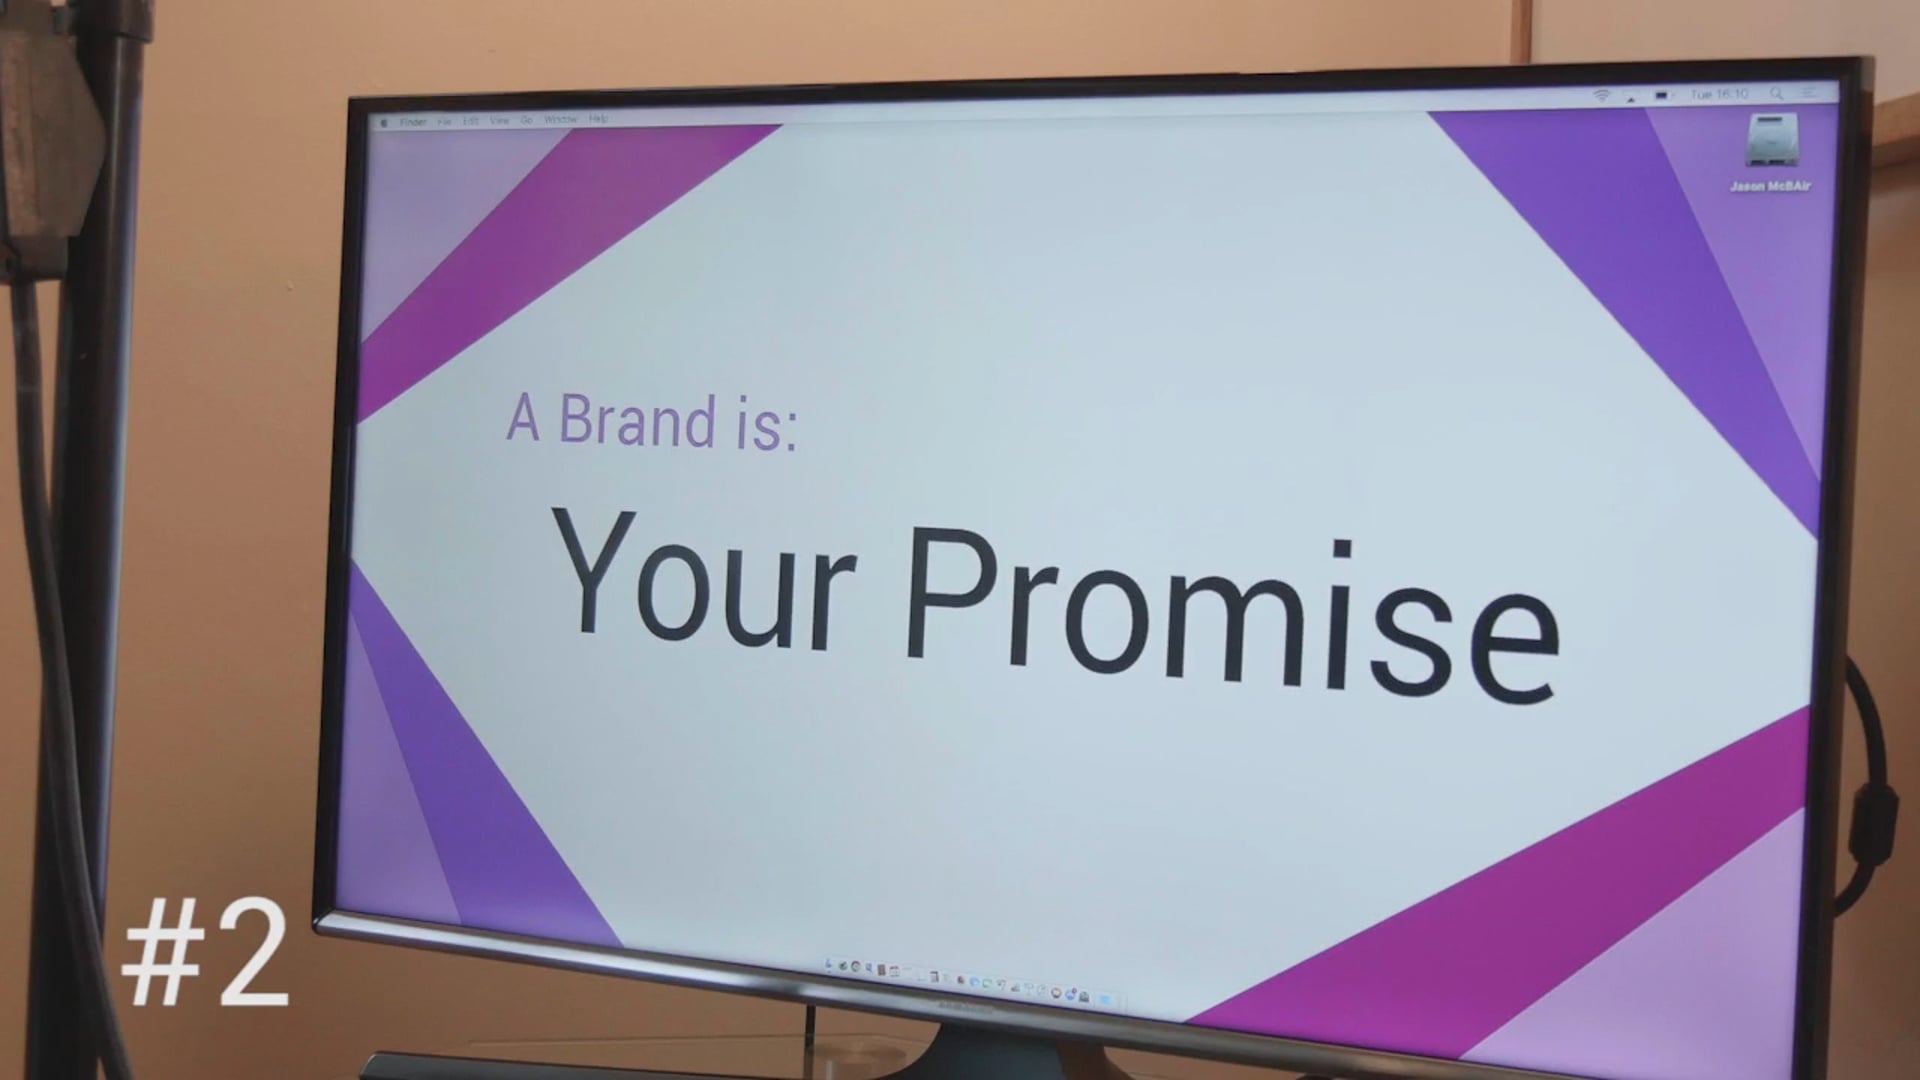 #2. A Brand is: Your Promise